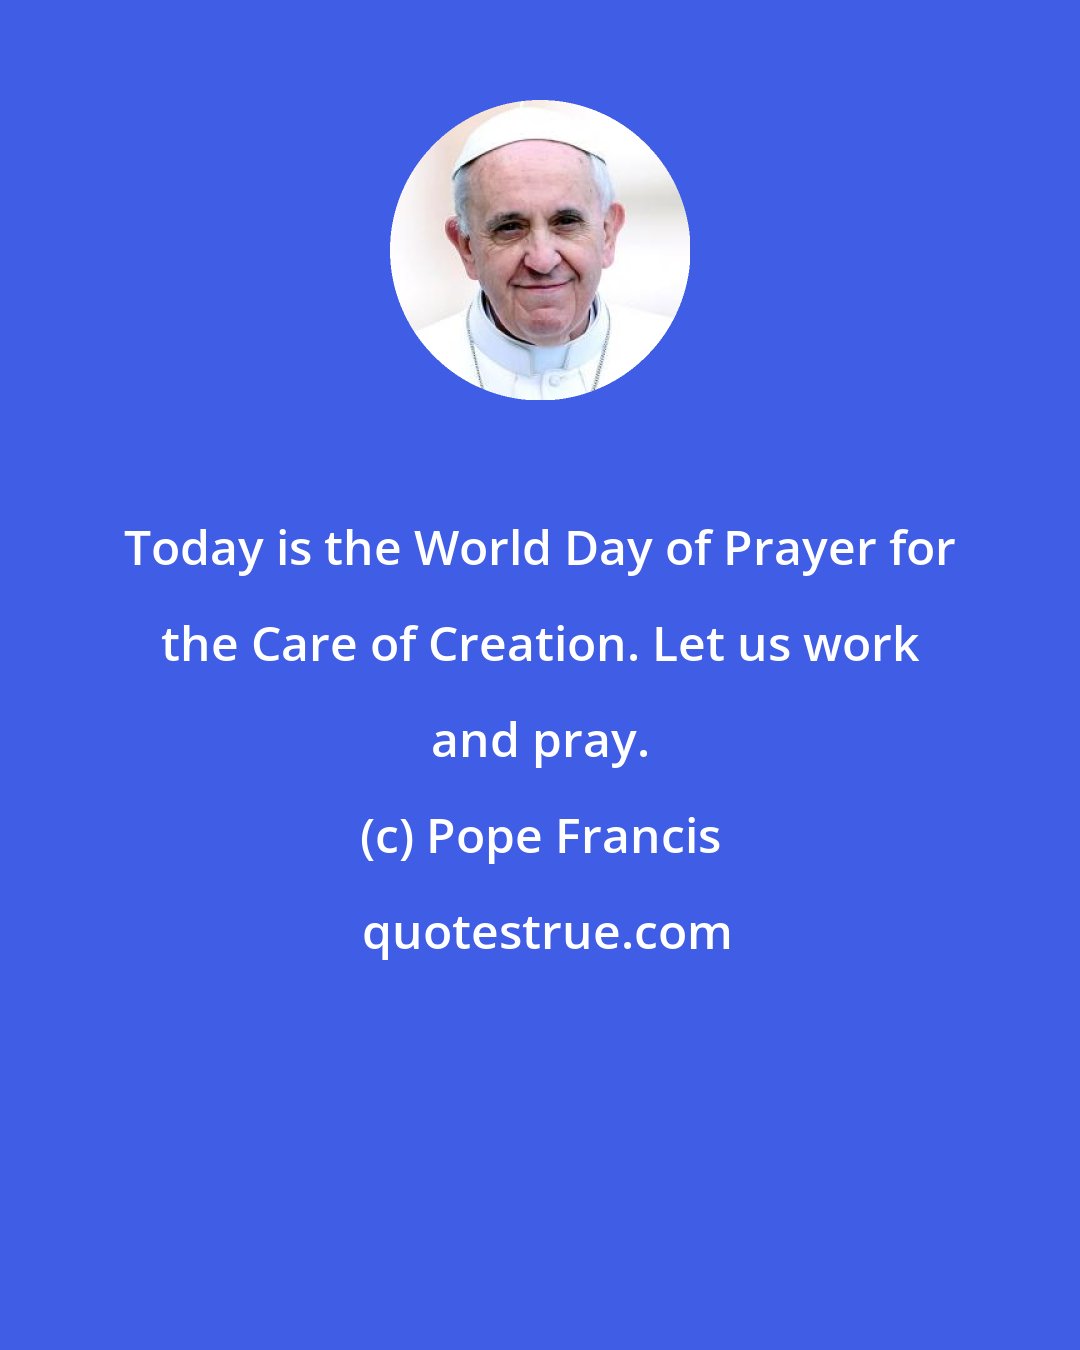 Pope Francis: Today is the World Day of Prayer for the Care of Creation. Let us work and pray.